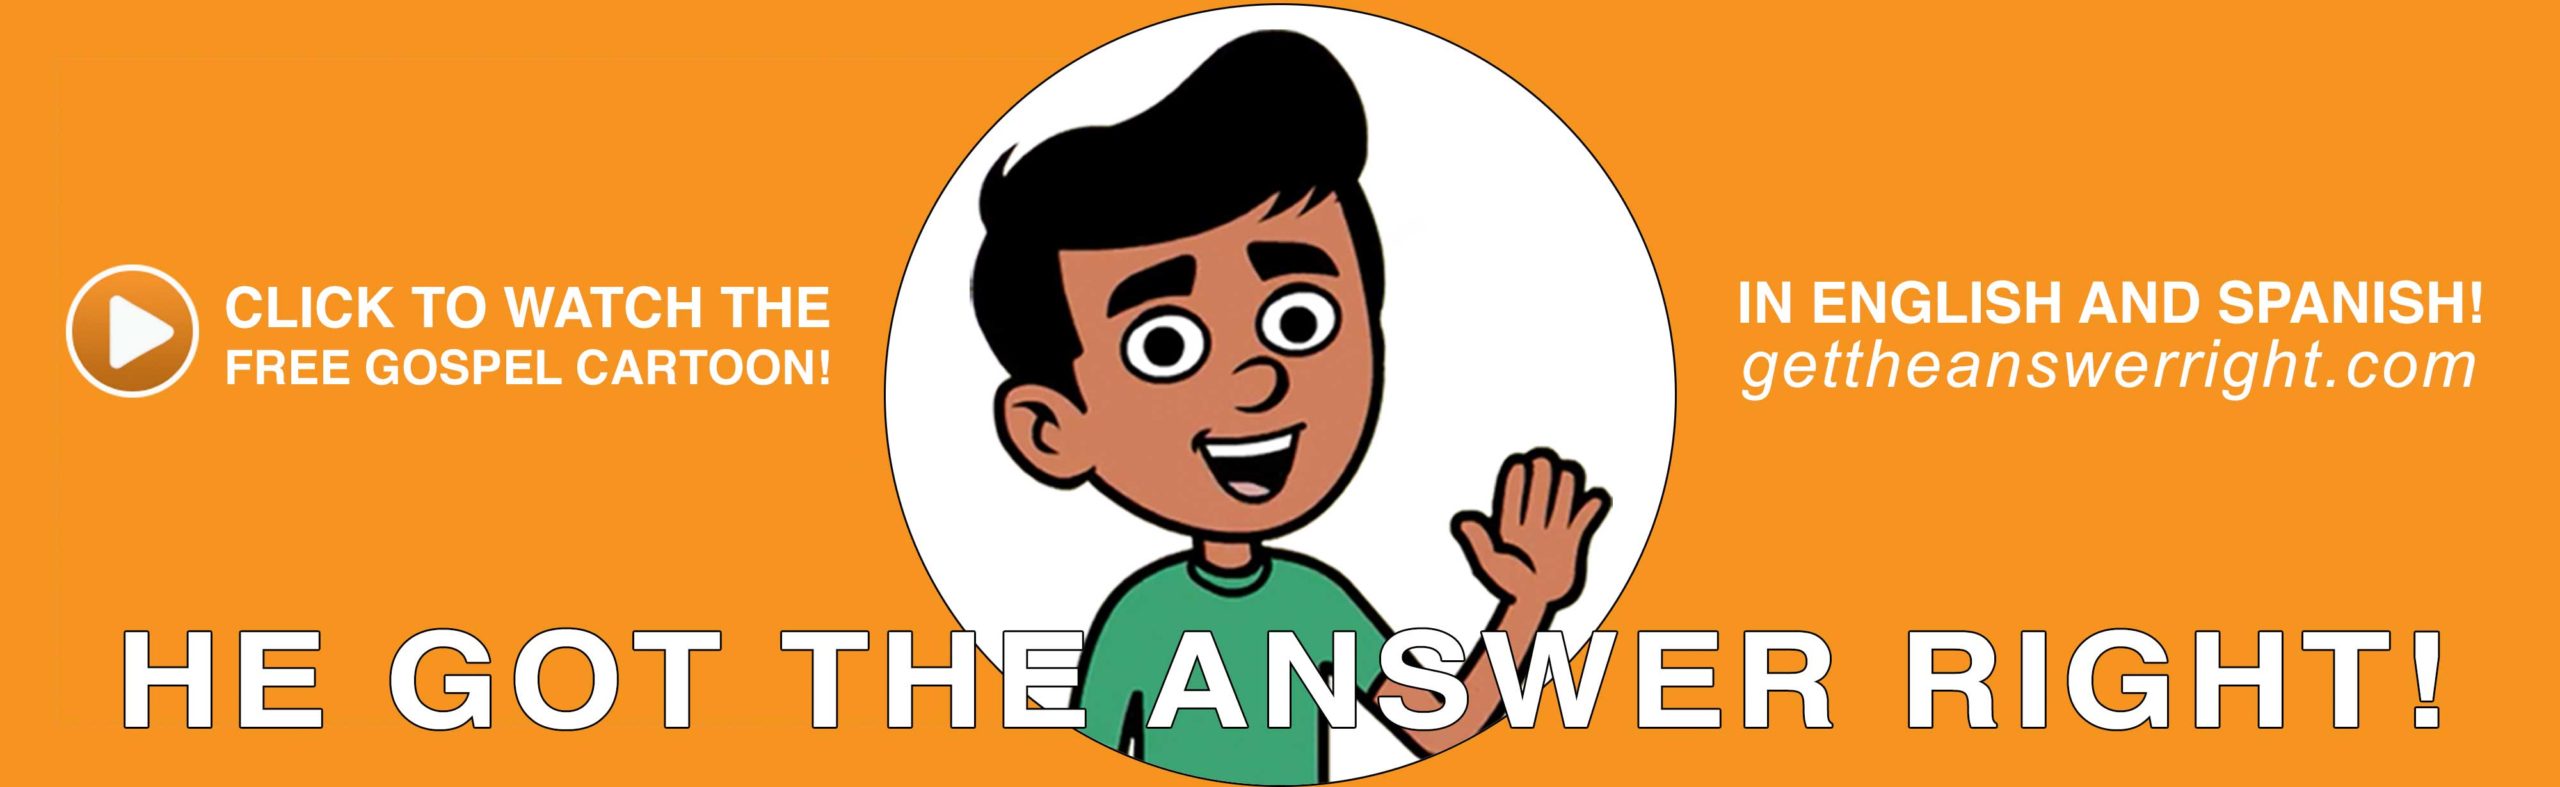 He Got the Answer Right Cartoon